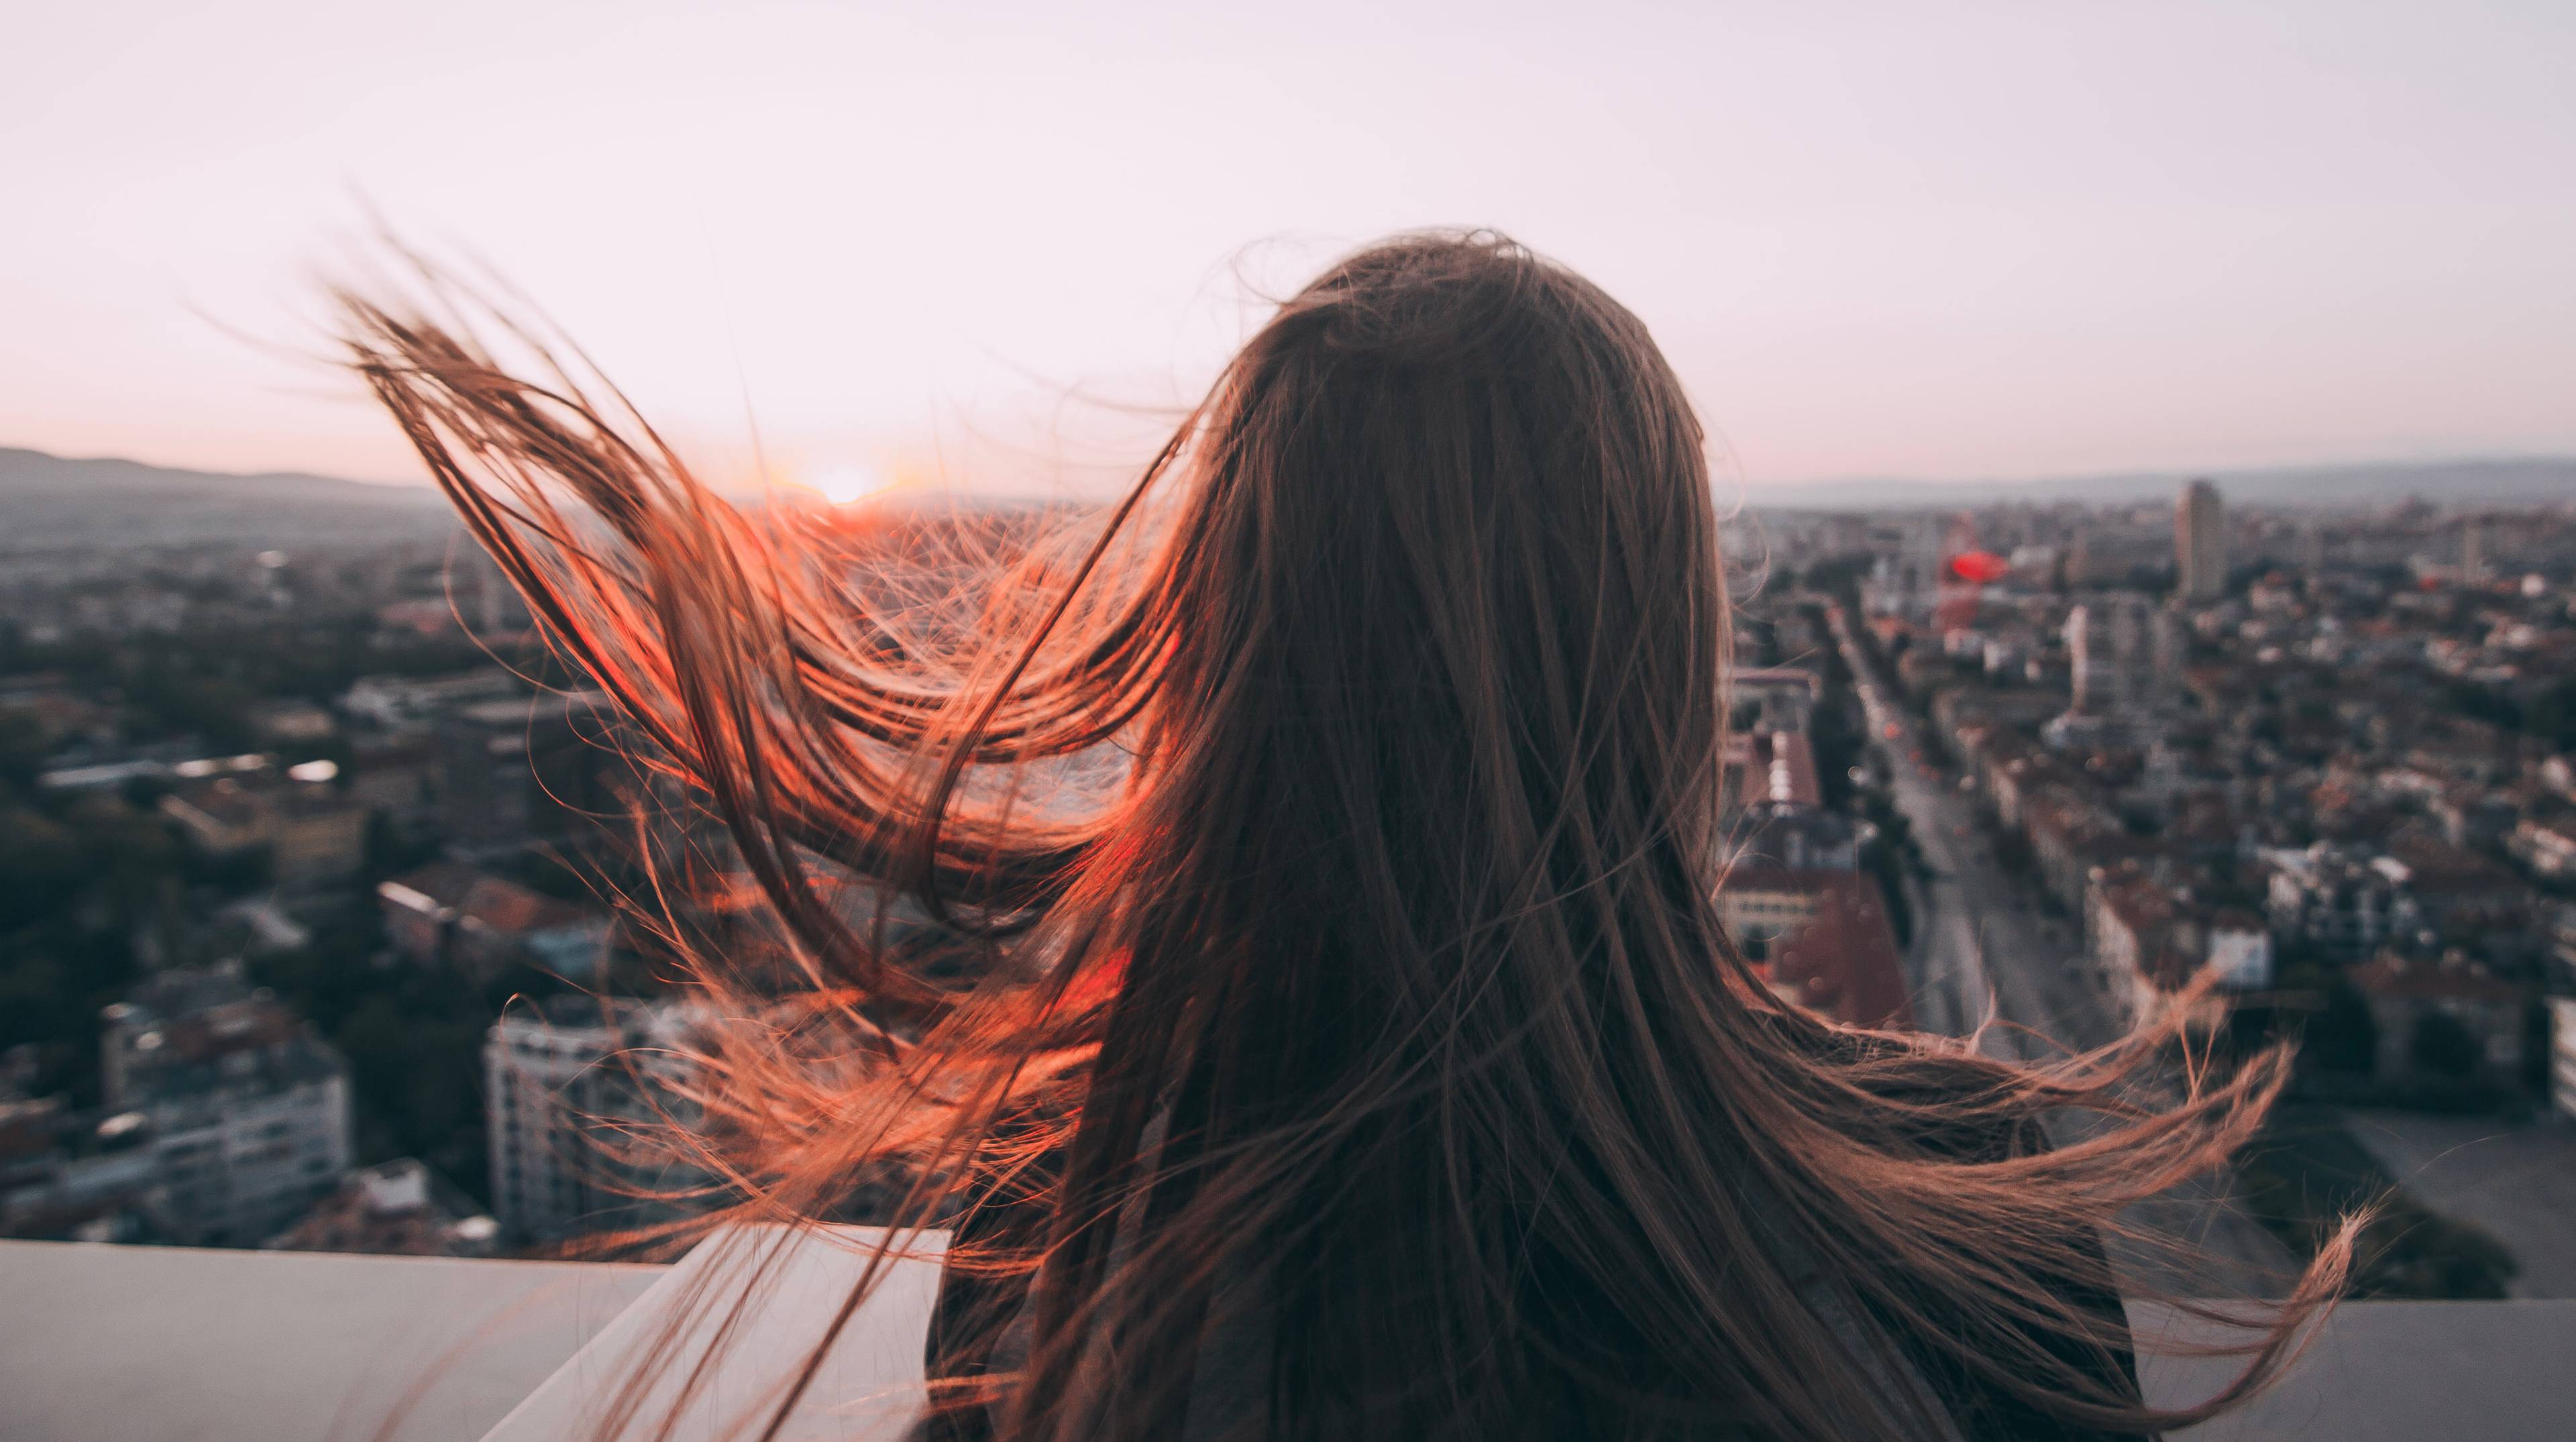 Woman overlooking a city at sunset